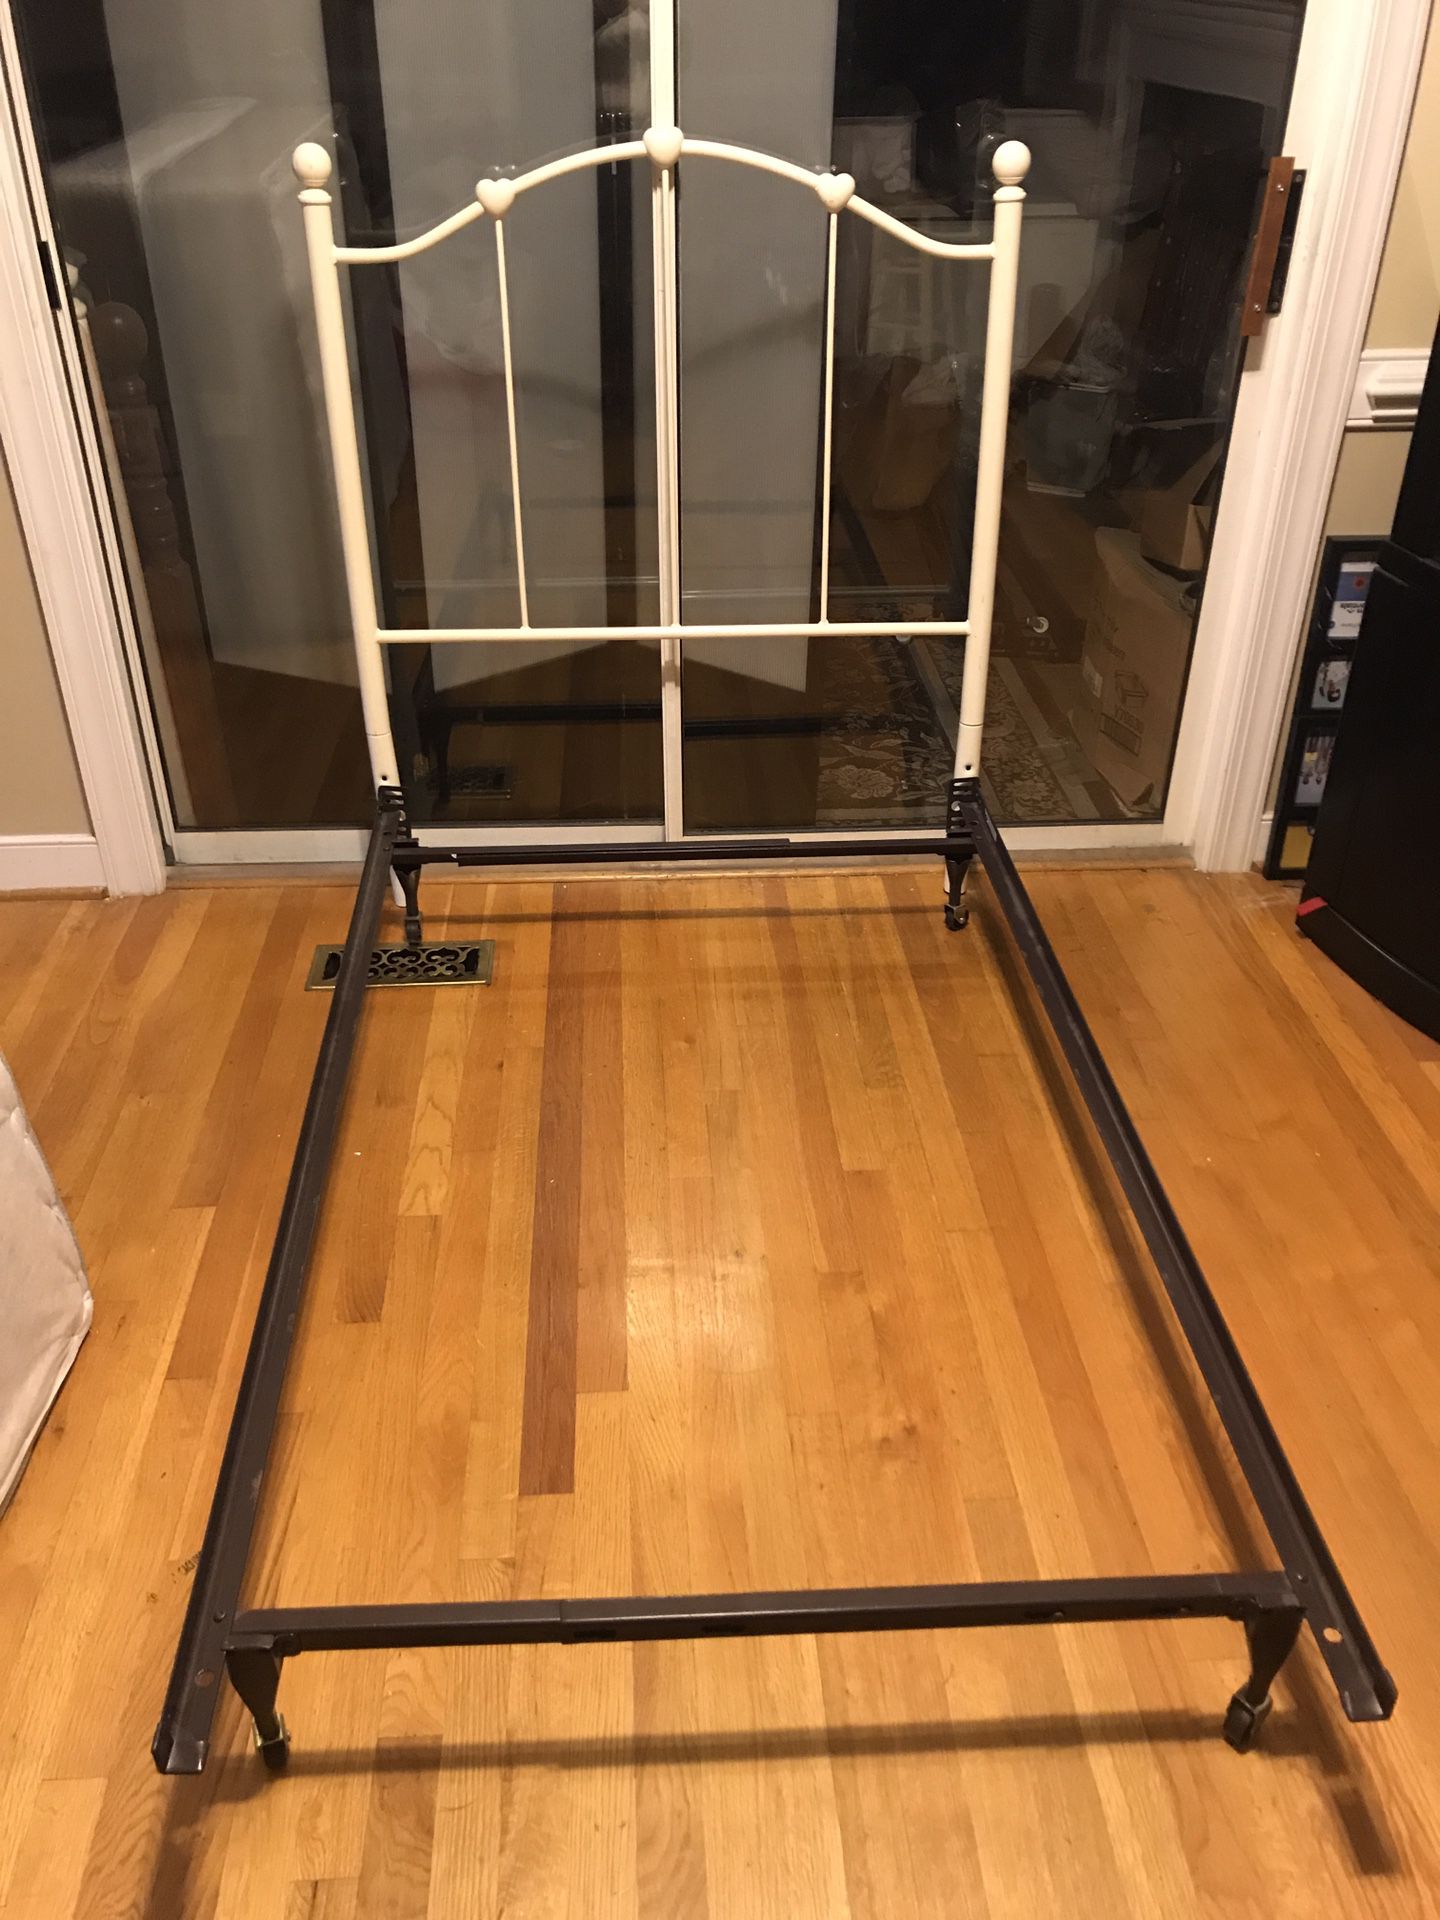 Metal twin size headboard and metal bed frame